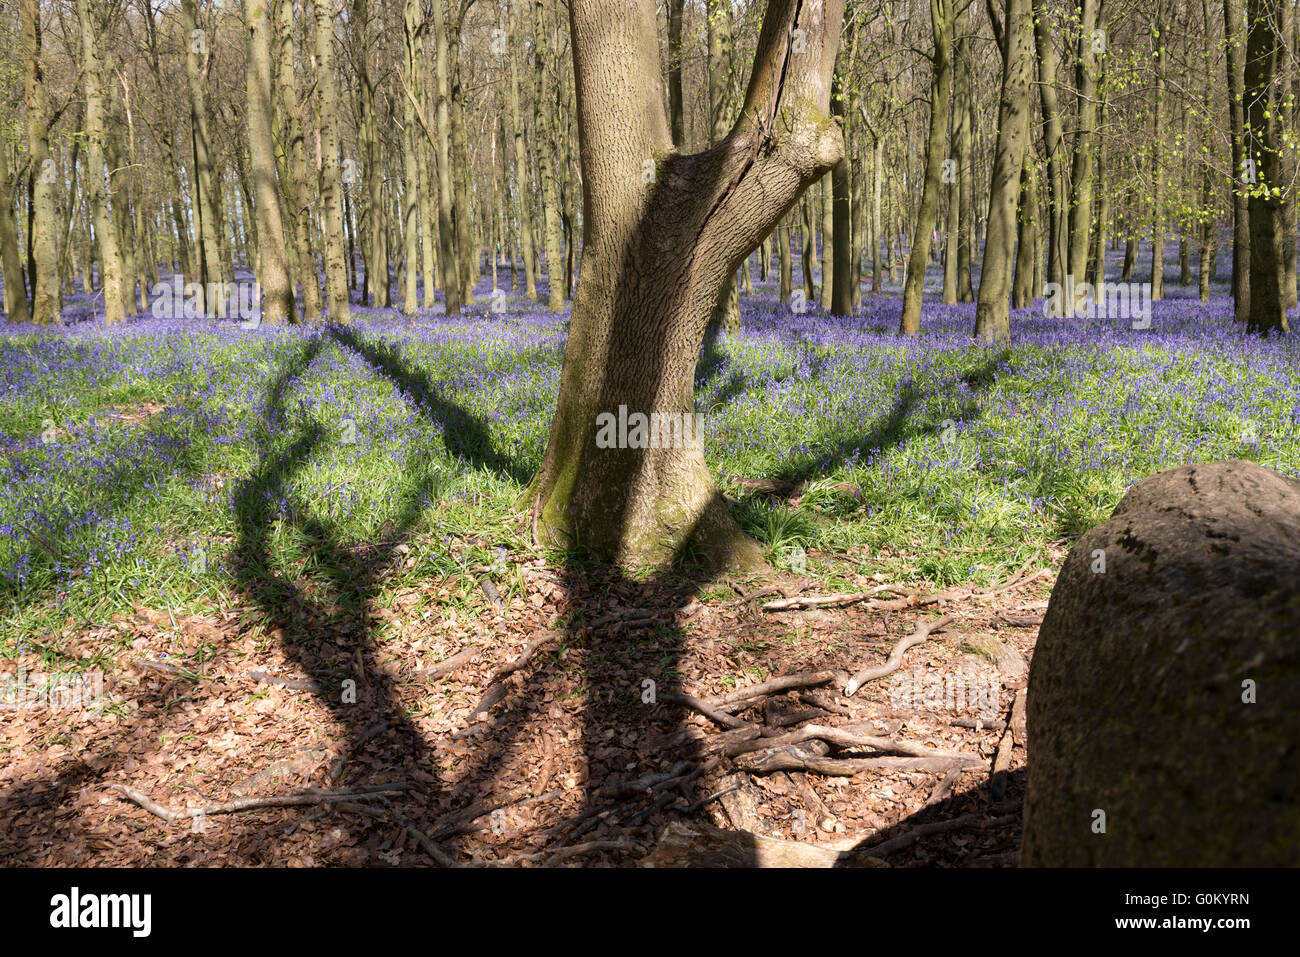 Tree casting shadows over spring English bluebells in beech woods, England, UK. Stock Photo